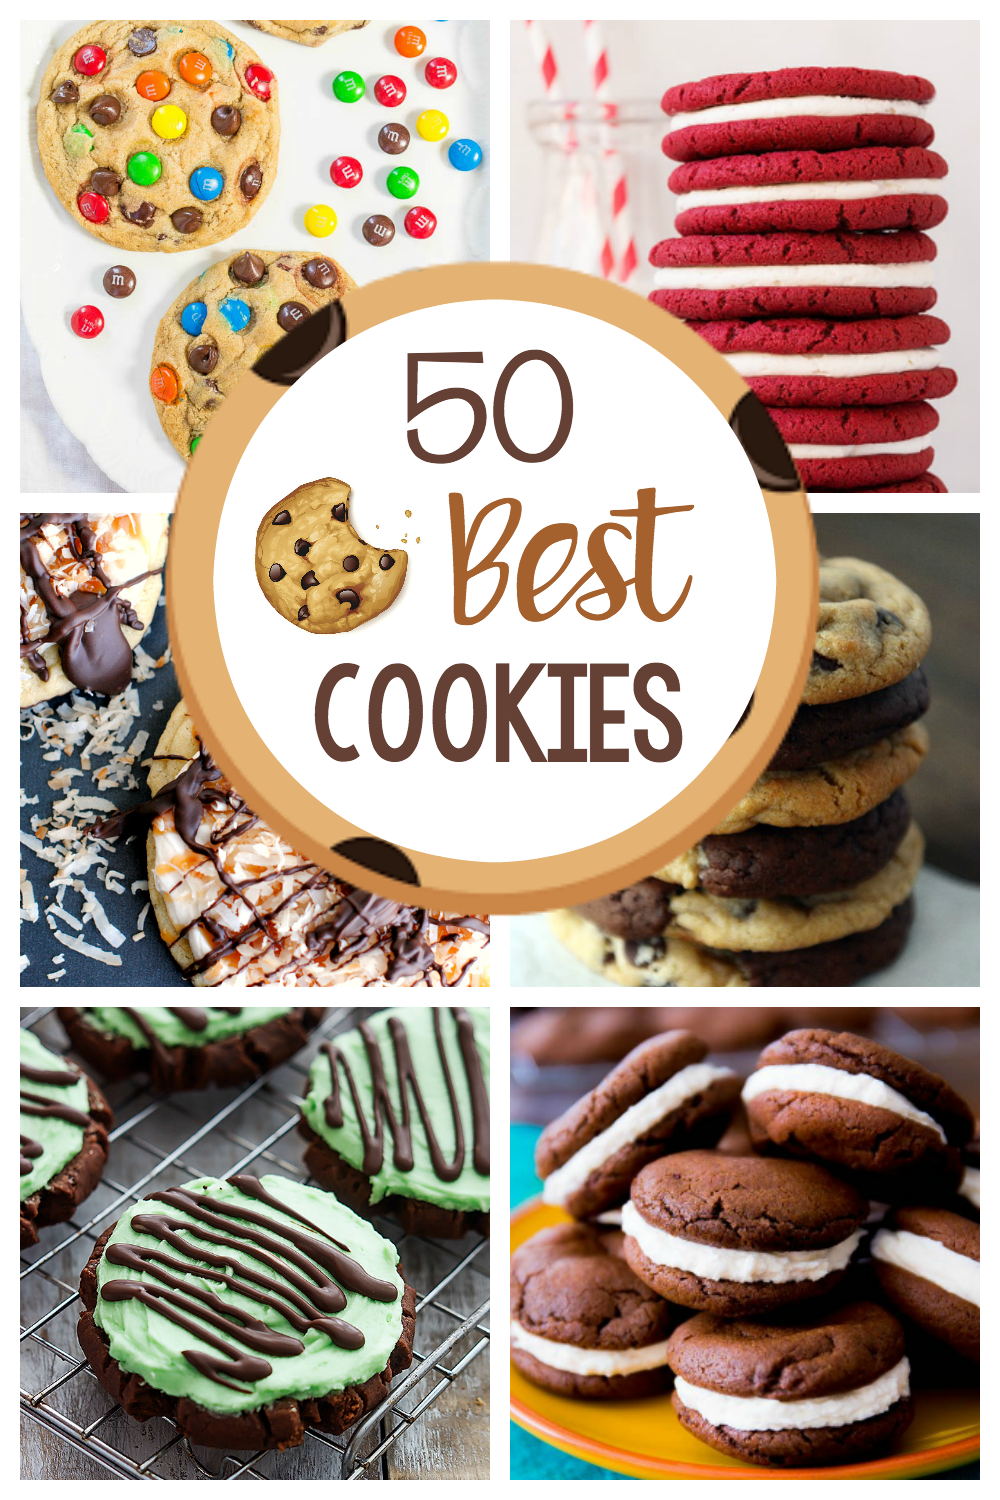 50 Best Cookies to Bake at Home! All of these cookies are amazing. Think outside the chocolate chip cookie and try some of these. The best cookies ever! #cookies #cookie #cookierecipes #dessert #dessertrecipes